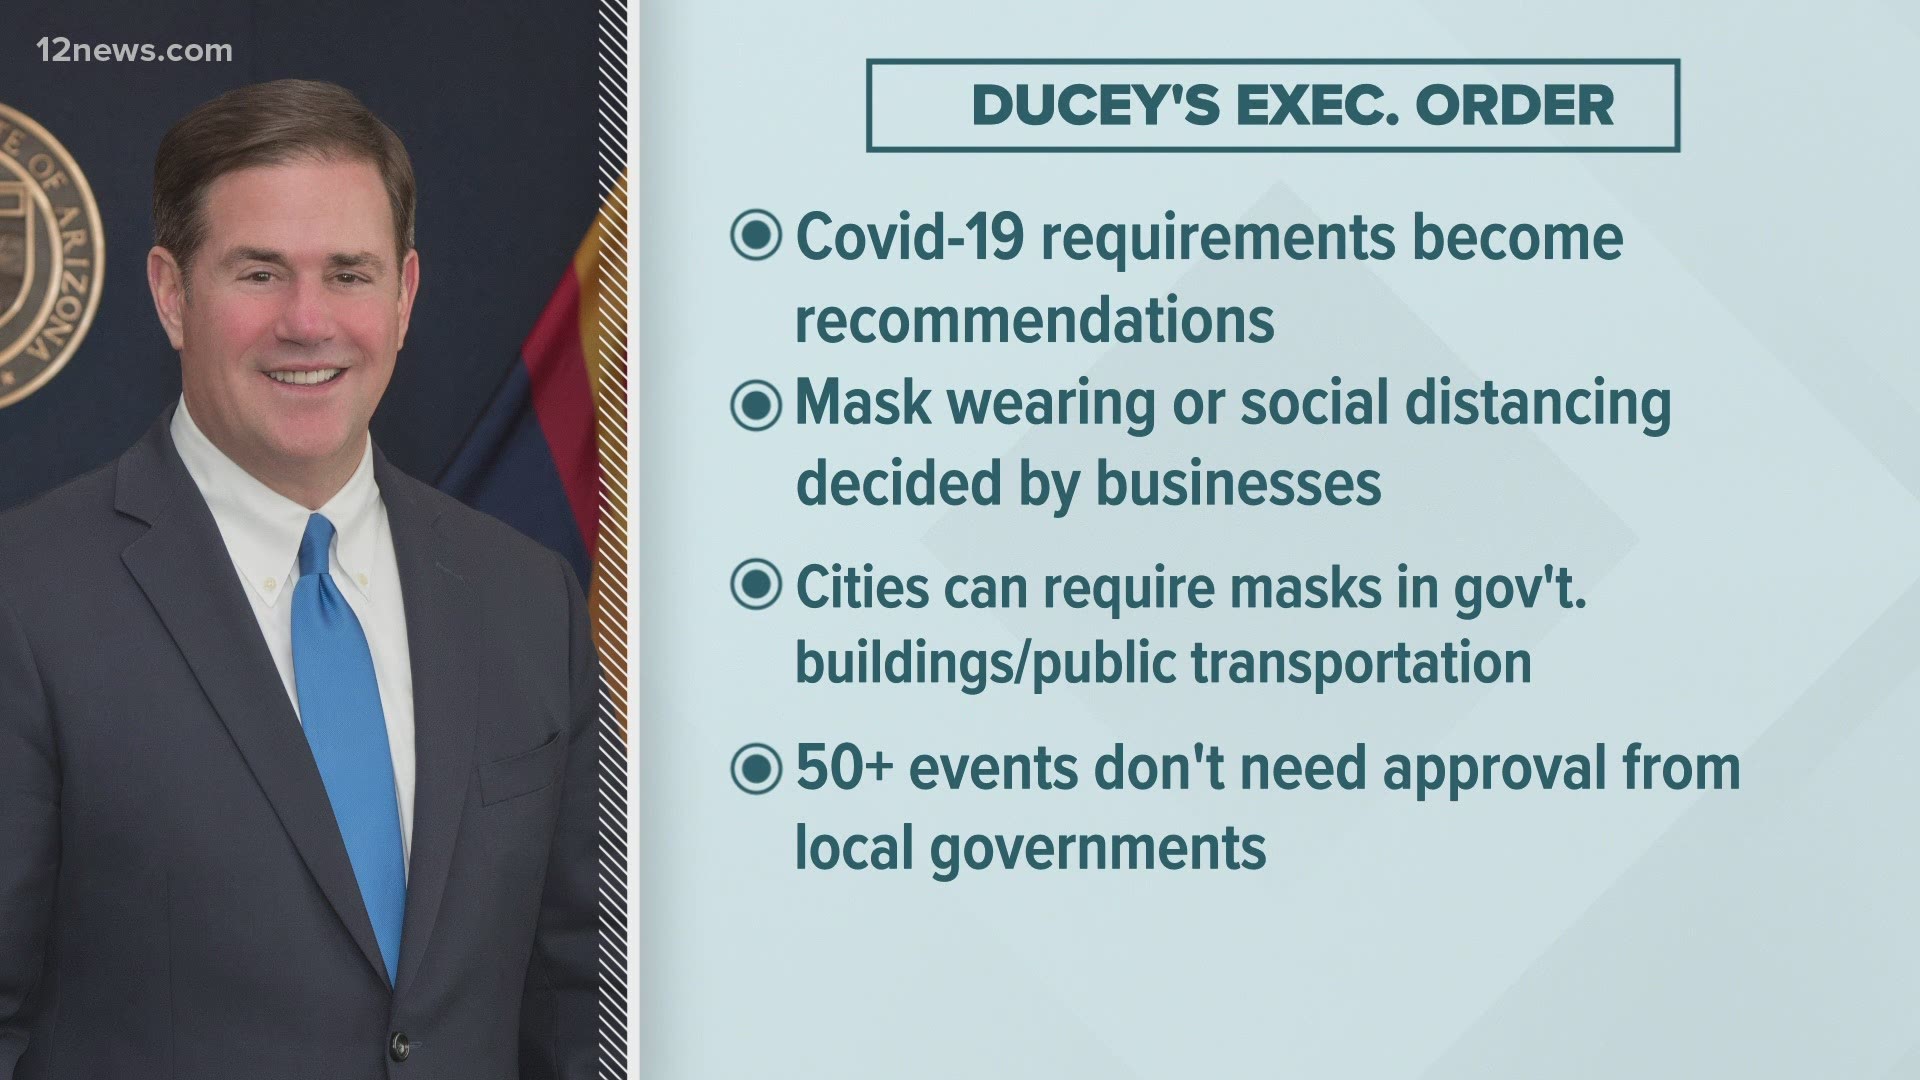 Arizona Gov. Doug Ducey is prohibiting government mask mandates and allowing bars and nightclubs shuttered for months to open their doors without restrictions.